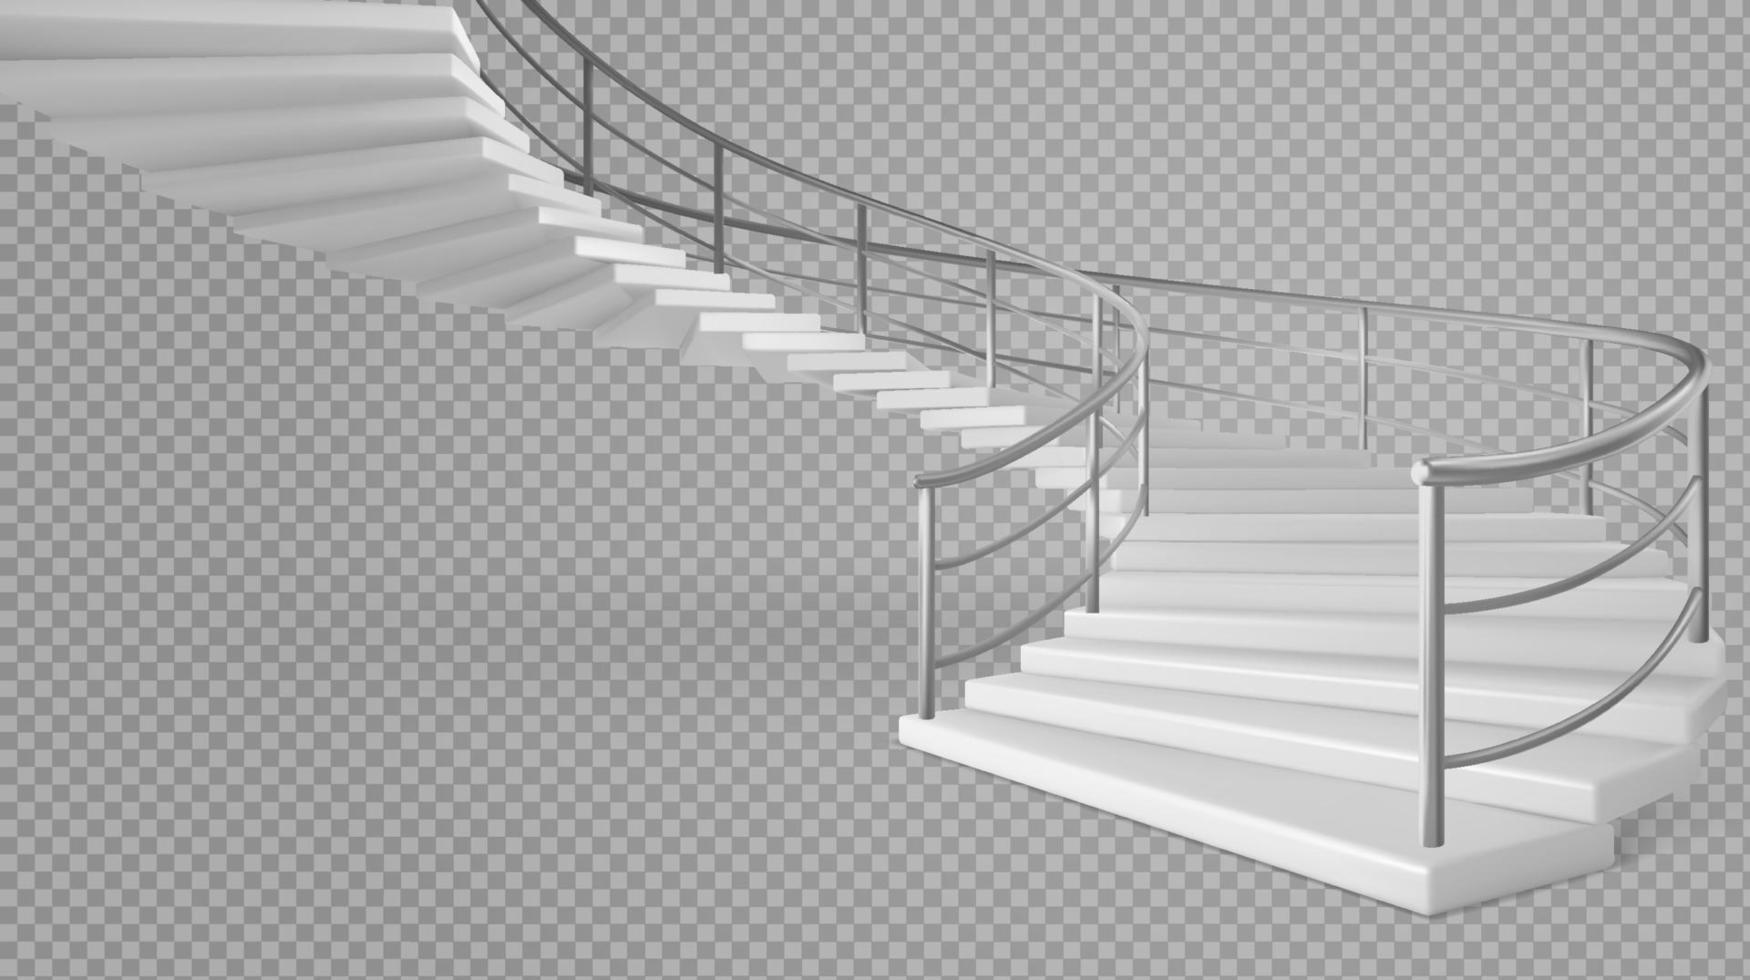 Spiral staircase white stairs with railings vector